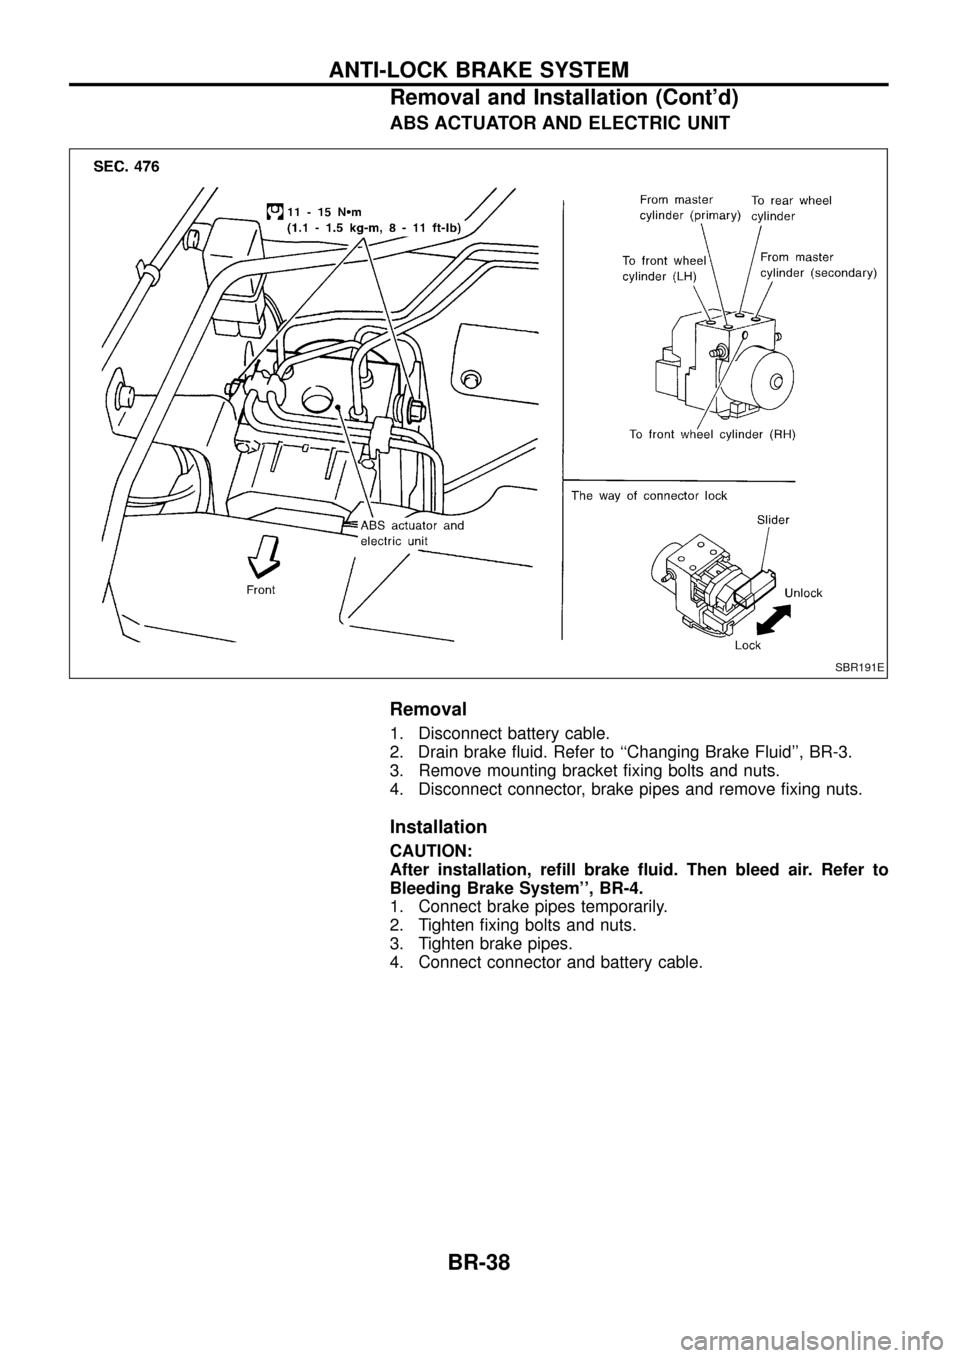 NISSAN PATROL 1998 Y61 / 5.G Brake System Owners Guide ABS ACTUATOR AND ELECTRIC UNIT
Removal
1. Disconnect battery cable.
2. Drain brake ¯uid. Refer to ``Changing Brake Fluid, BR-3.
3. Remove mounting bracket ®xing bolts and nuts.
4. Disconnect conne